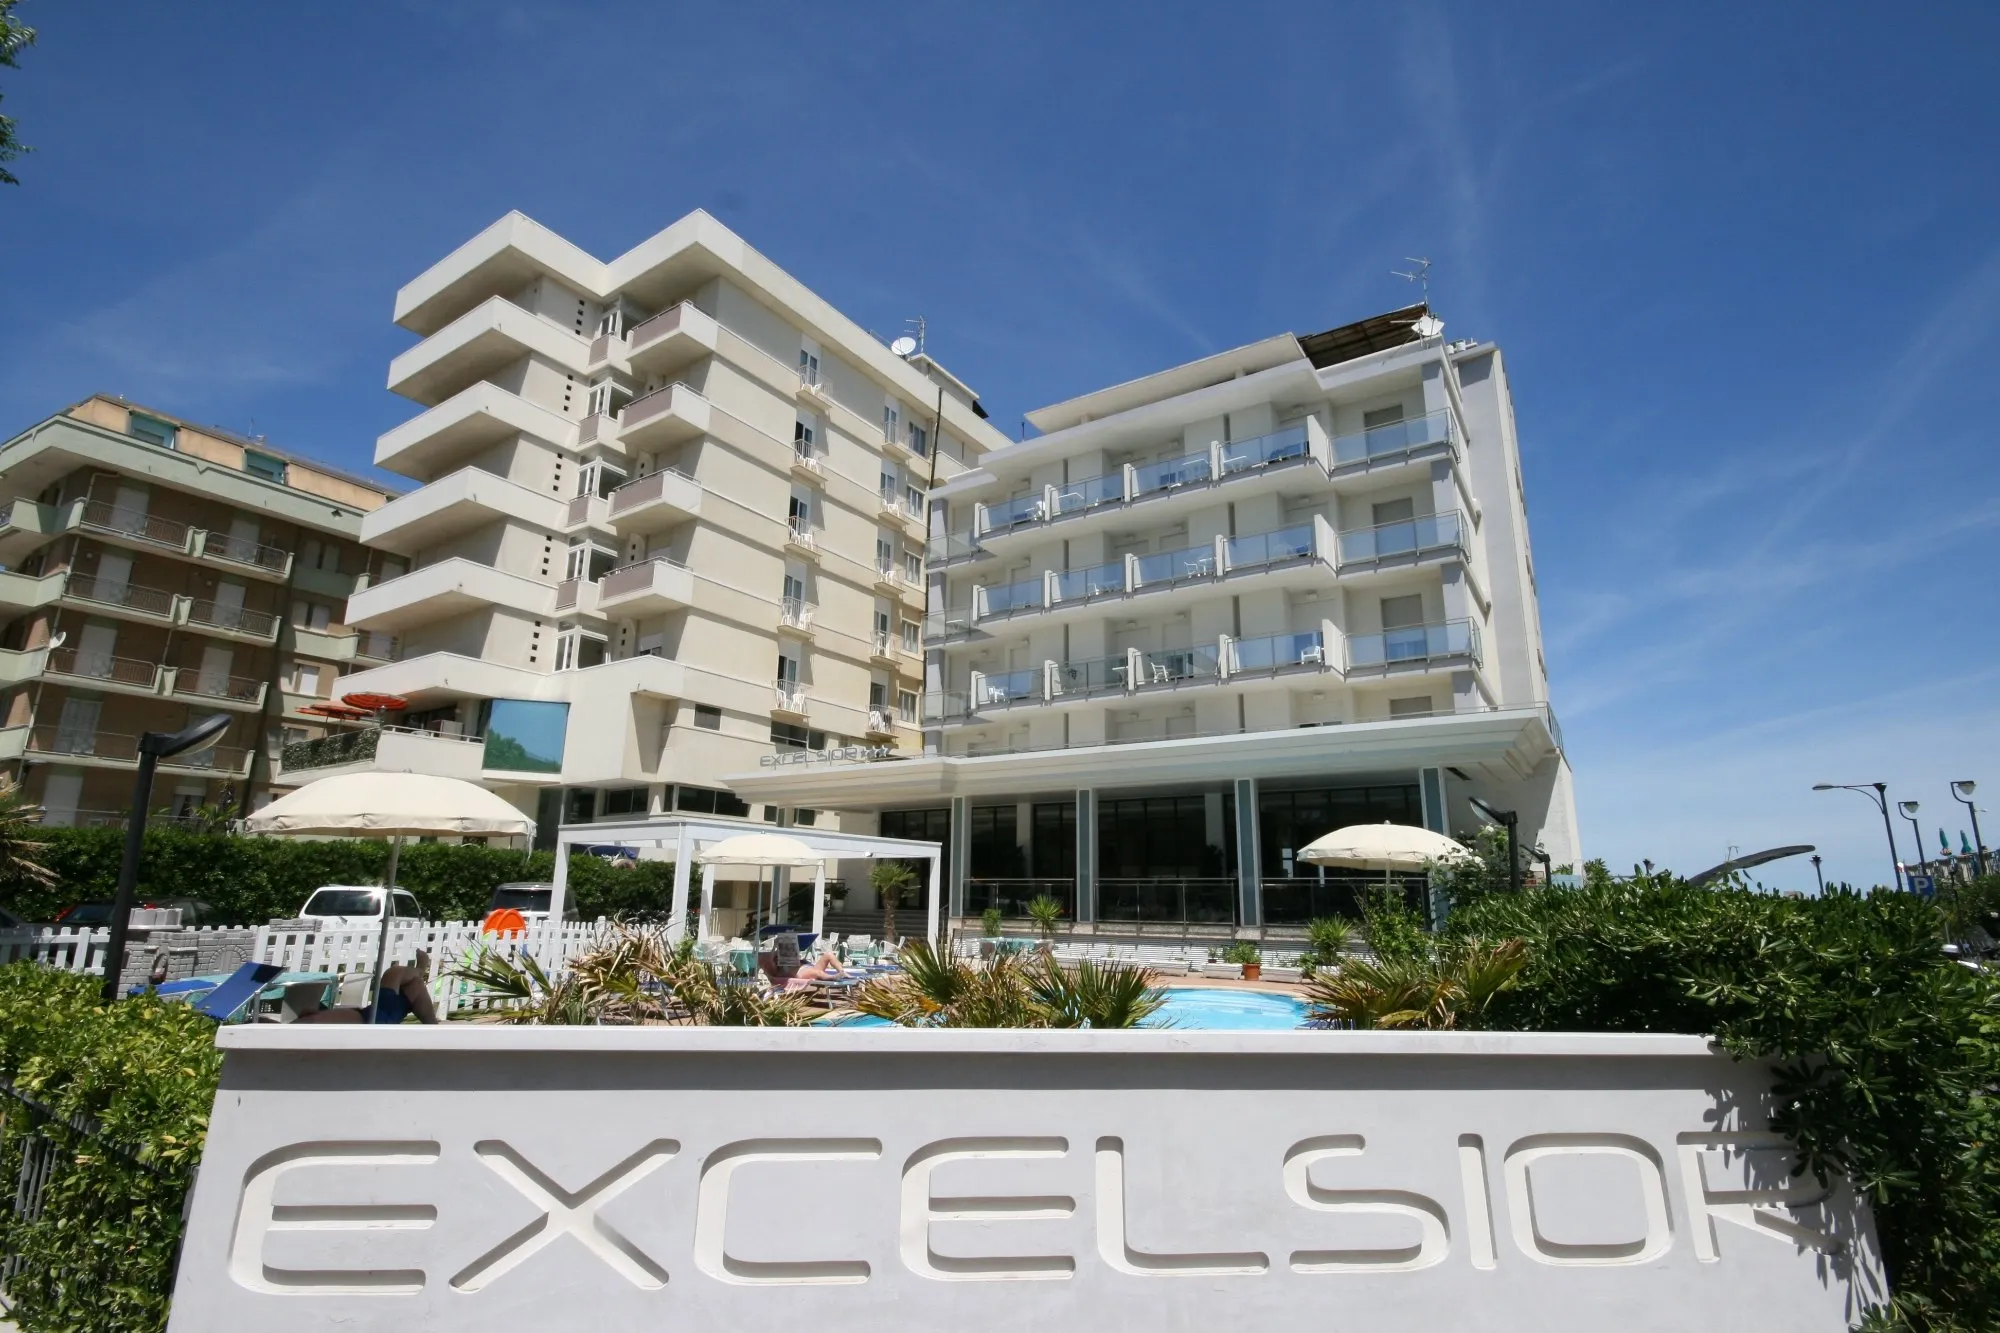 Building hotel Hotel Excelsior Cattolica